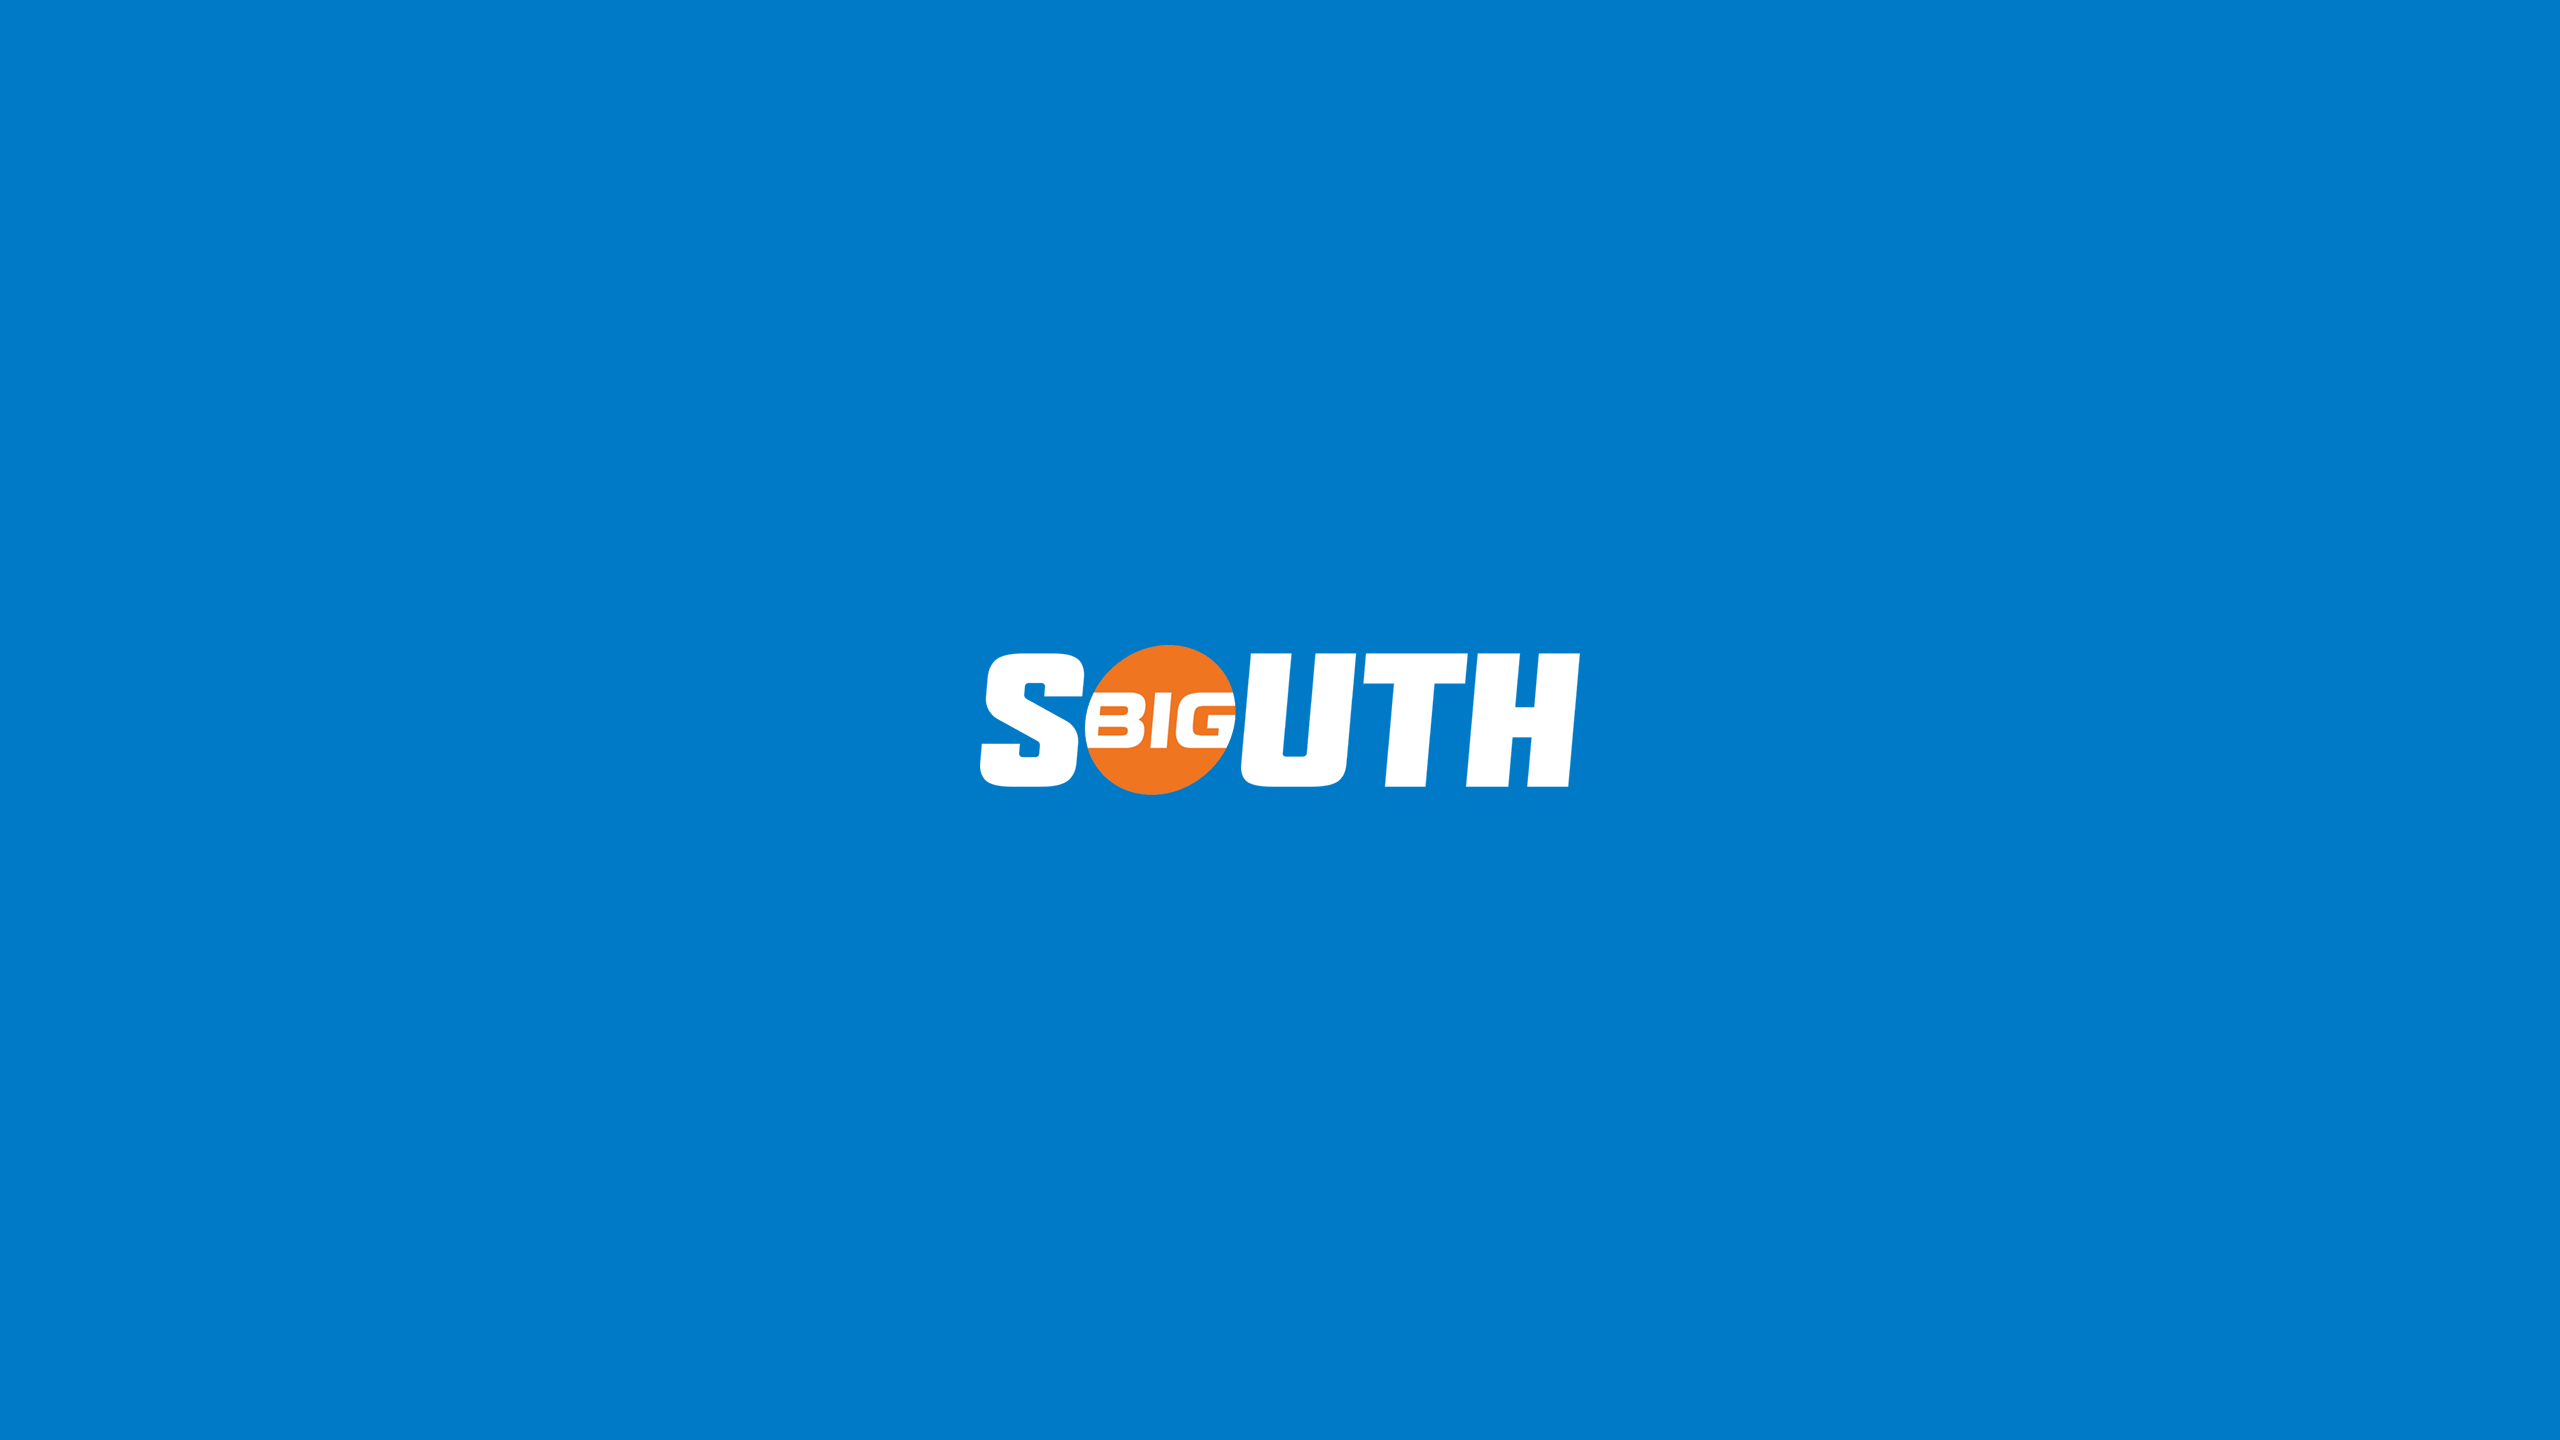 Big South Conference Basketball - NCAAB - Square Bettor